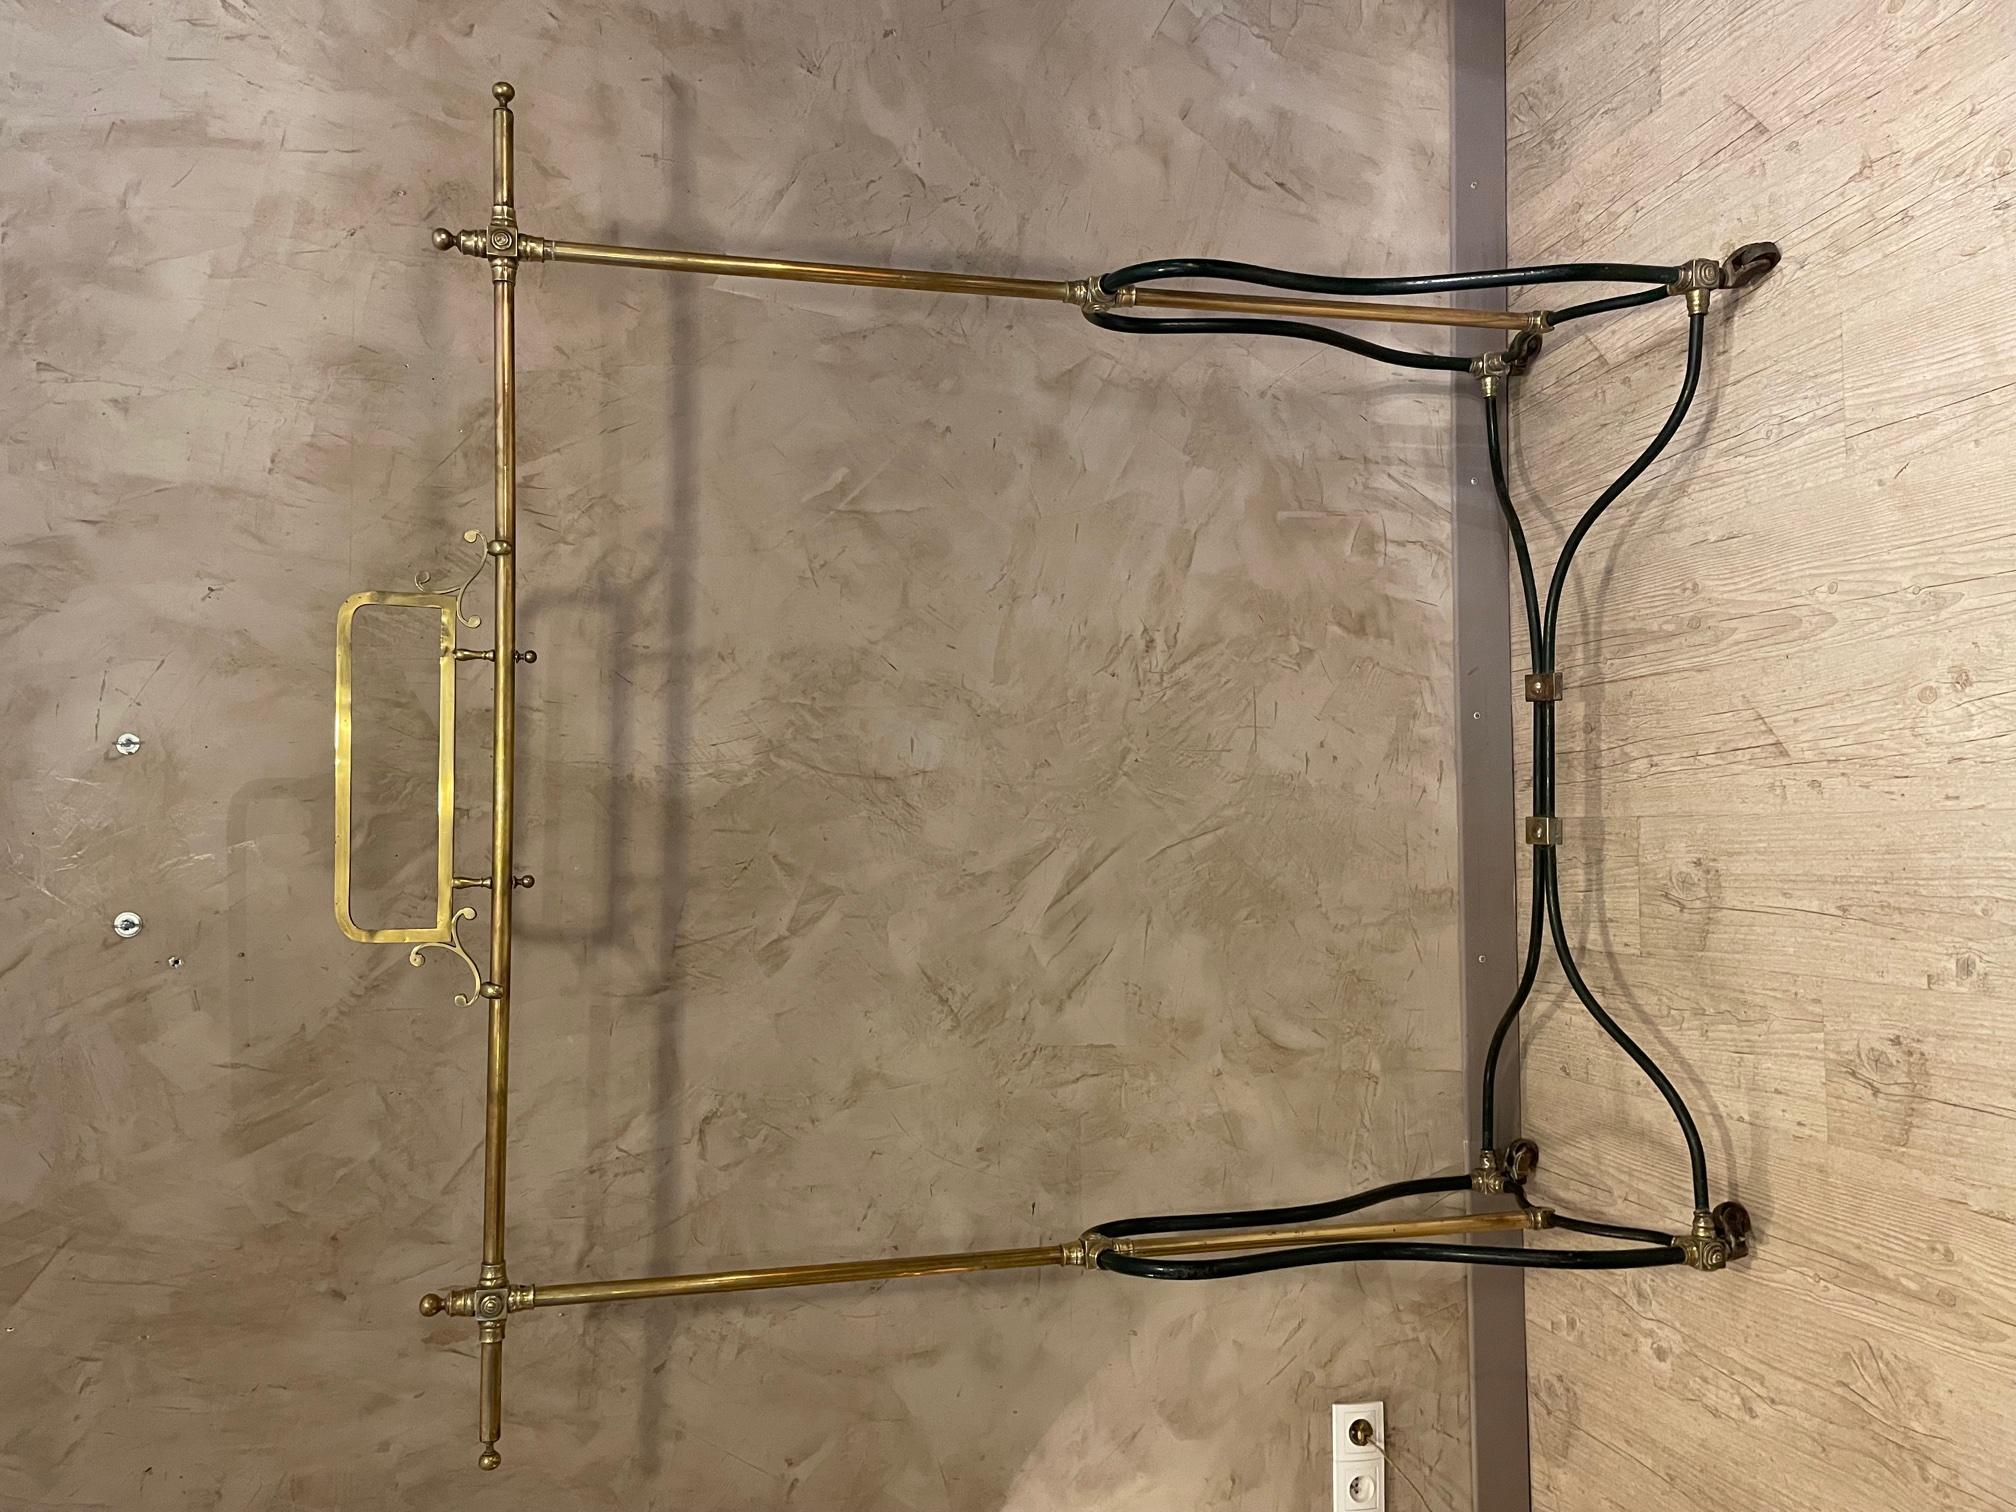 Exceptionnal early 20th century French Hotel rolling coat hanger made with gilded brass and metal. 
Four wheels. Entirely dismantable. Art Nouveau period.
Stamp of the hotel P.Lauzur rue Saint Denis Paris. 
Beautiful quality and condition.